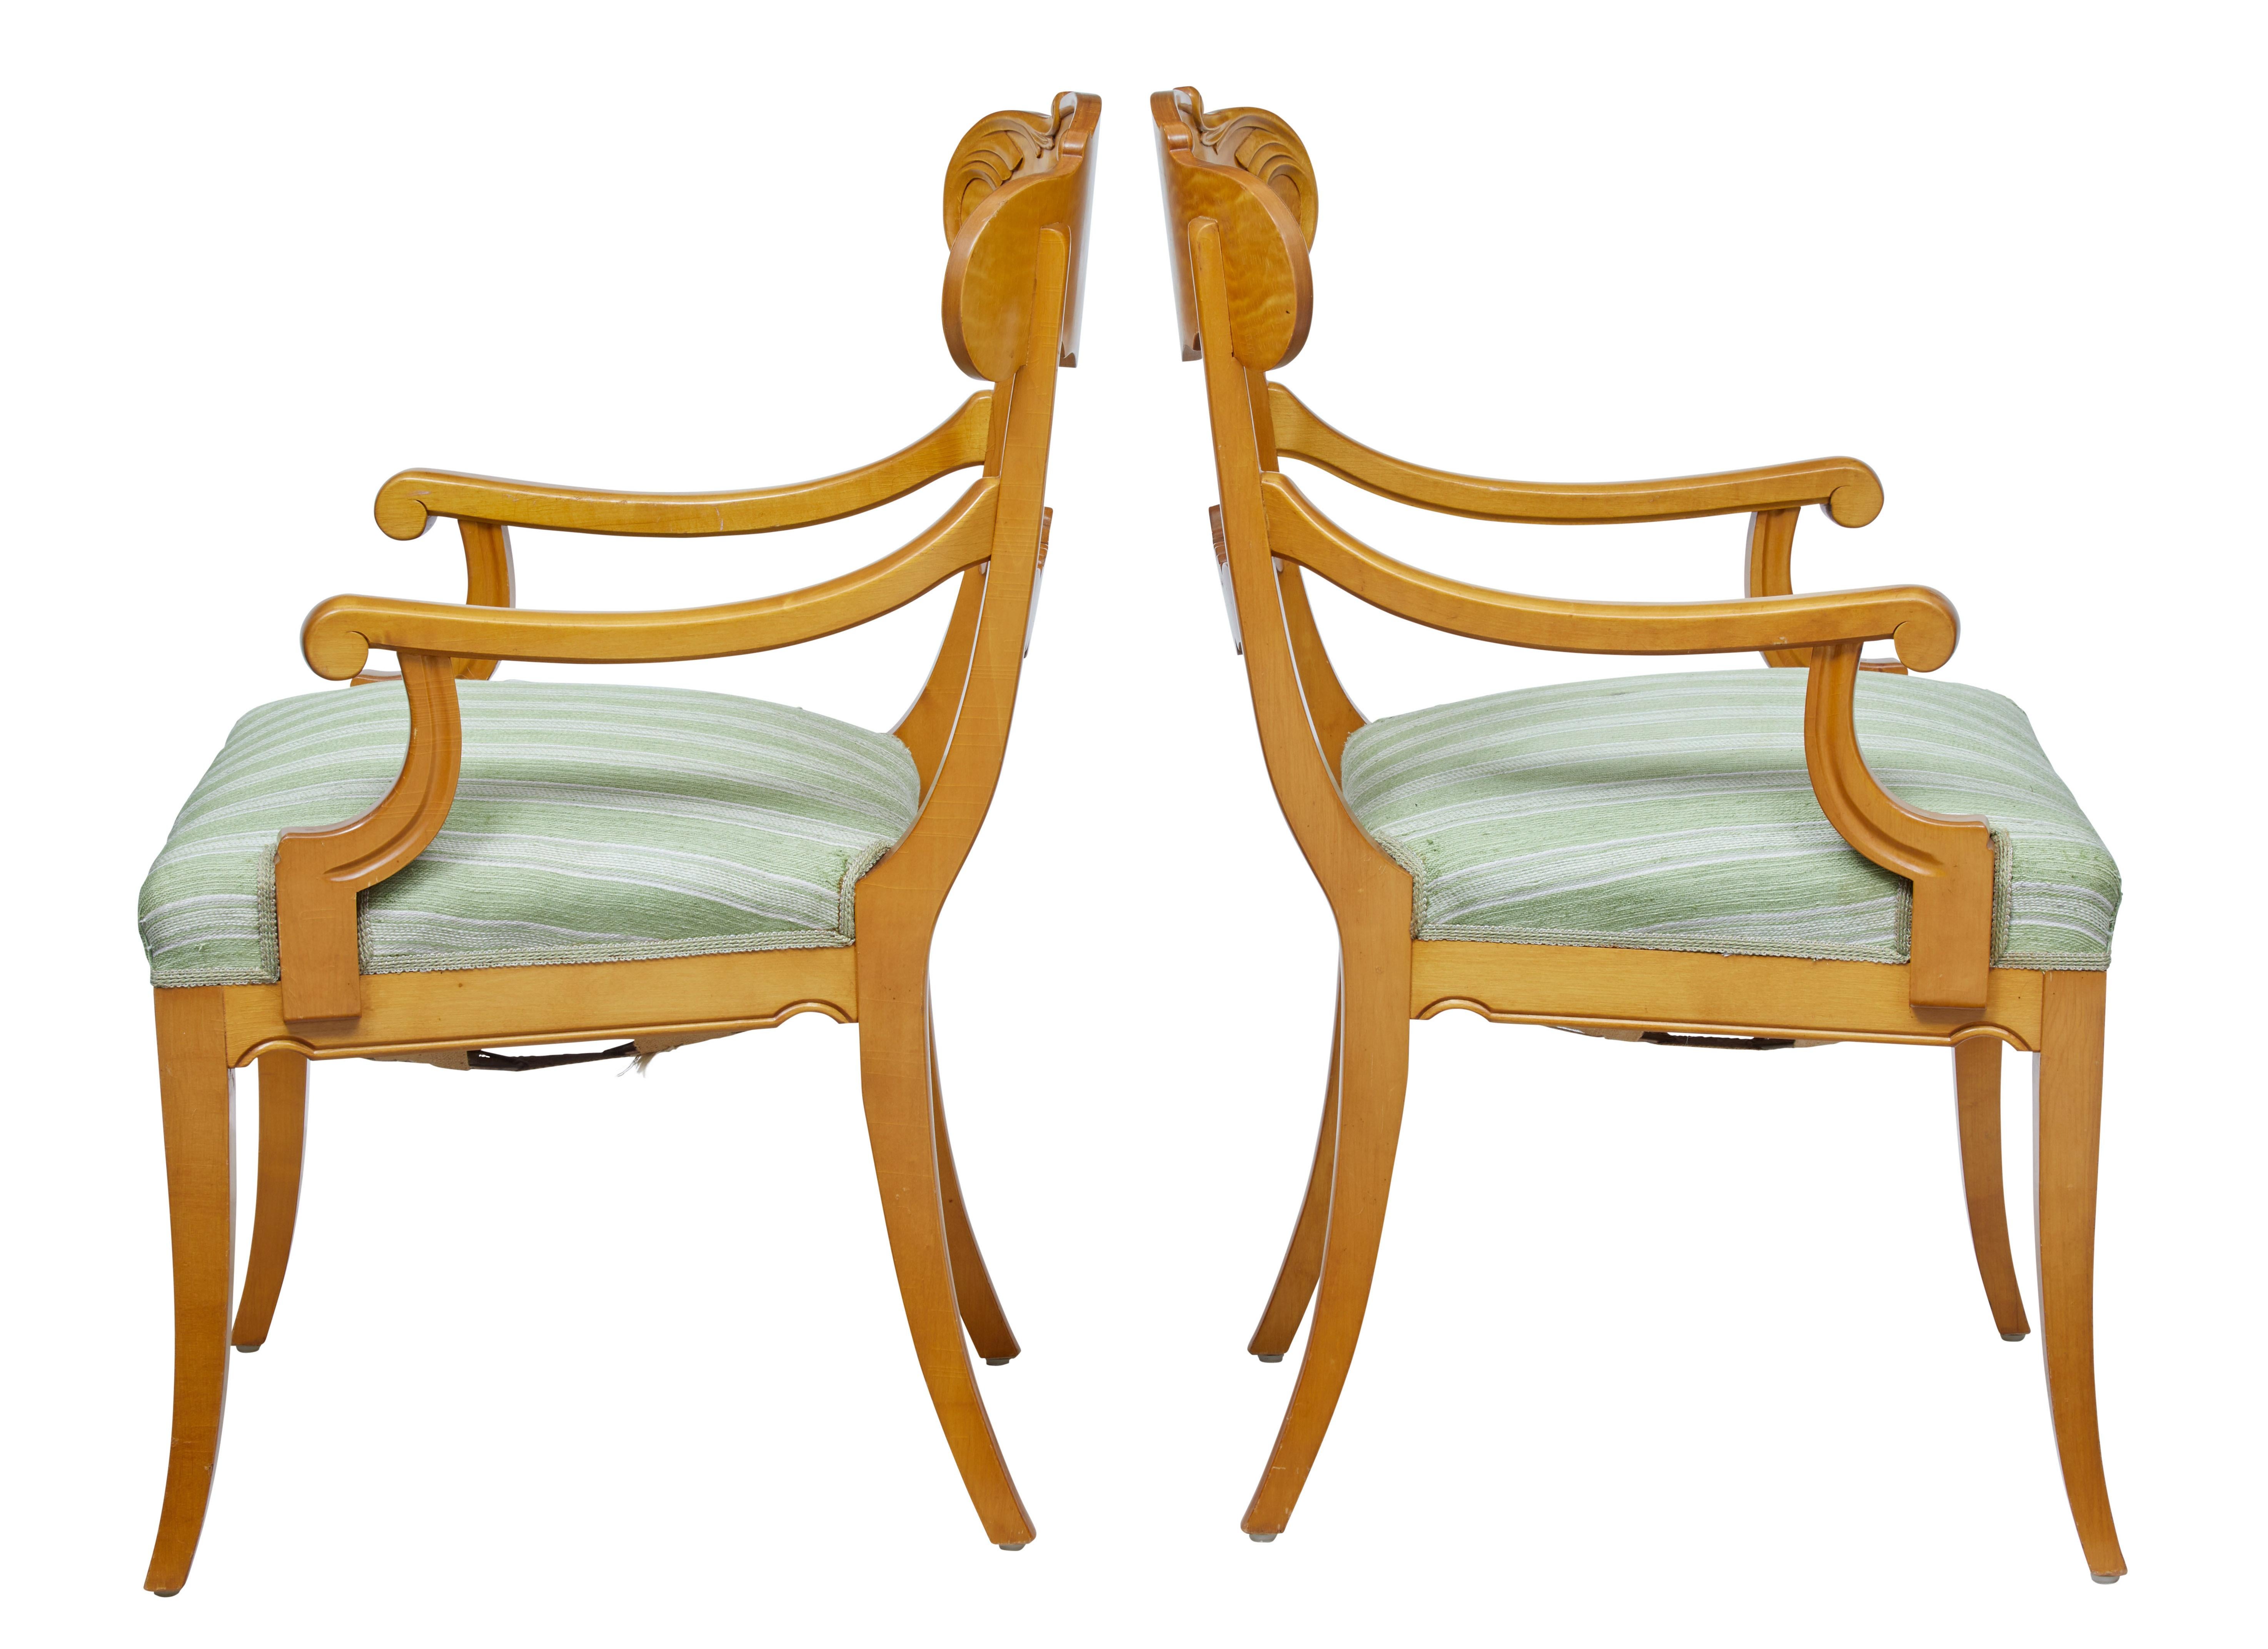 Good quality pair of birch armchairs in the Karl Johan taste, circa 1920.

Shaped and carved back rest, flowing to the scrolling arms. Standing on sabre legs.

Upholstery with some plucking and minor staining, but in usable